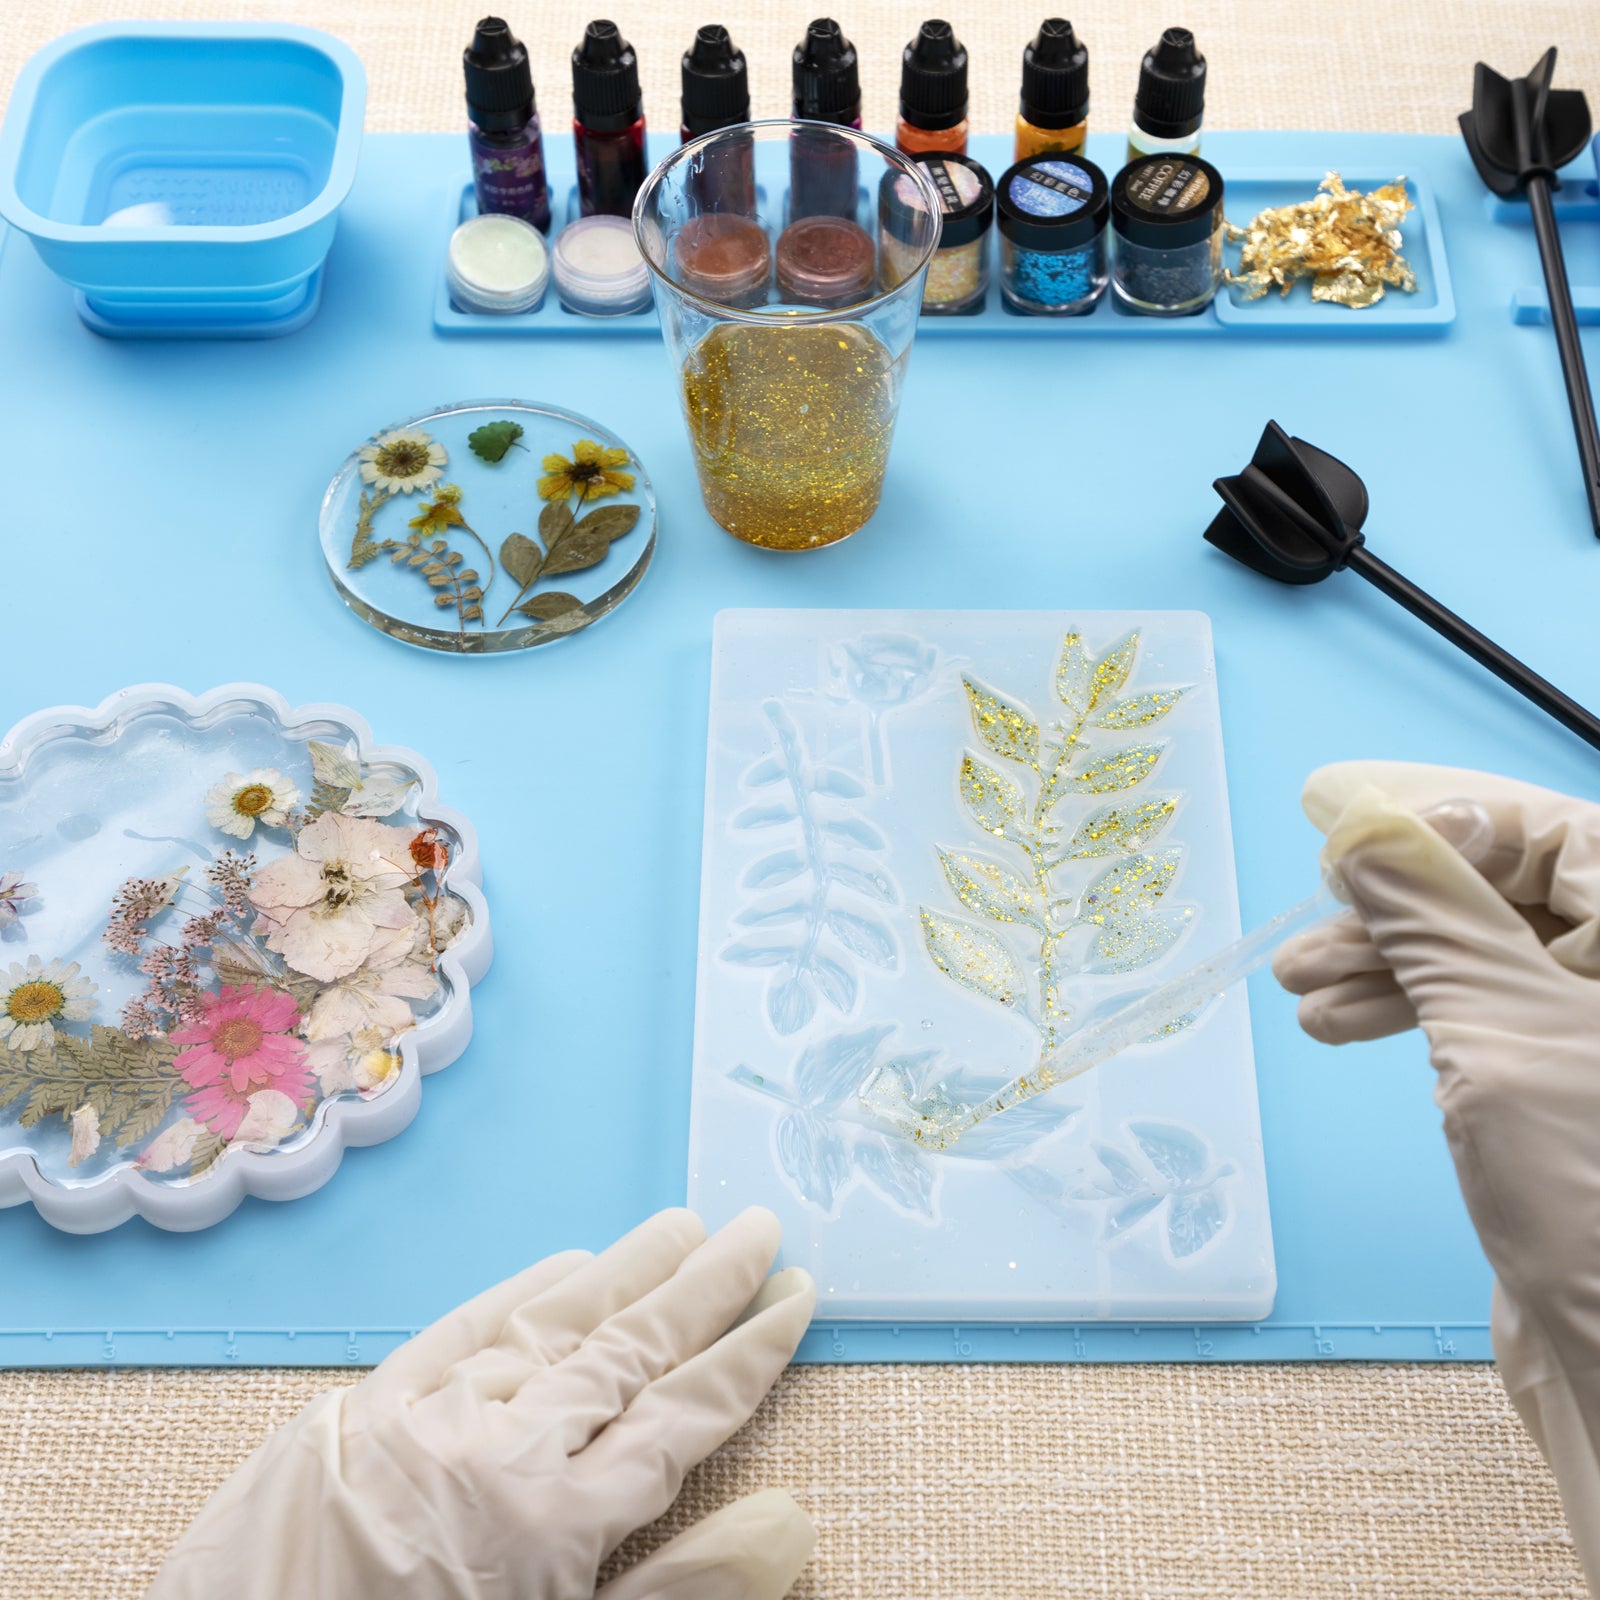 How to Create a Simple Art Piece with Epoxy Resin